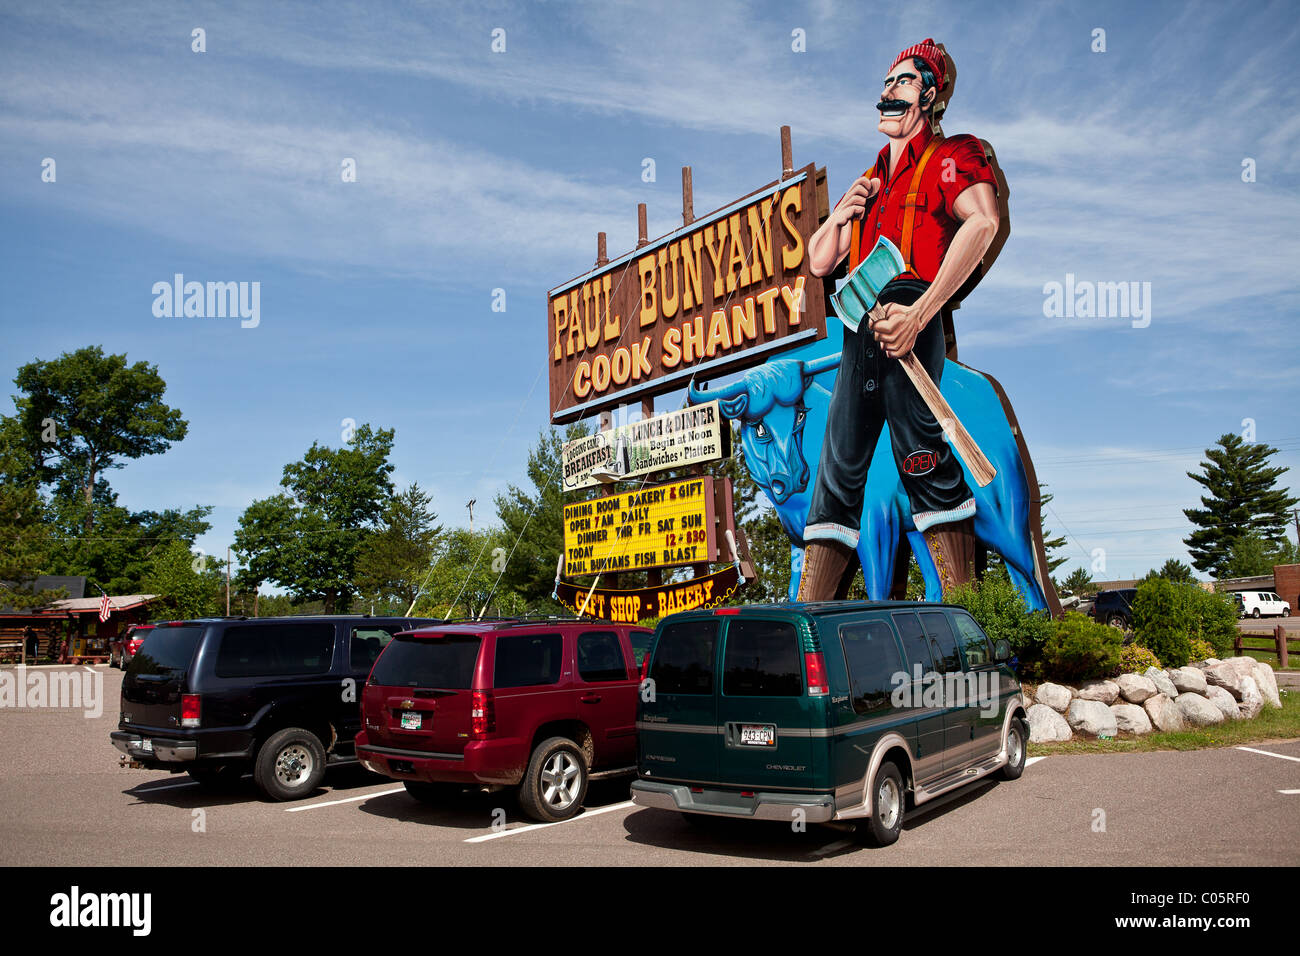 Paul Bunyan's Cook Shanty, a well known roadside restaurant in the Northwoods town of Minocqua, Wisconsin. Stock Photo